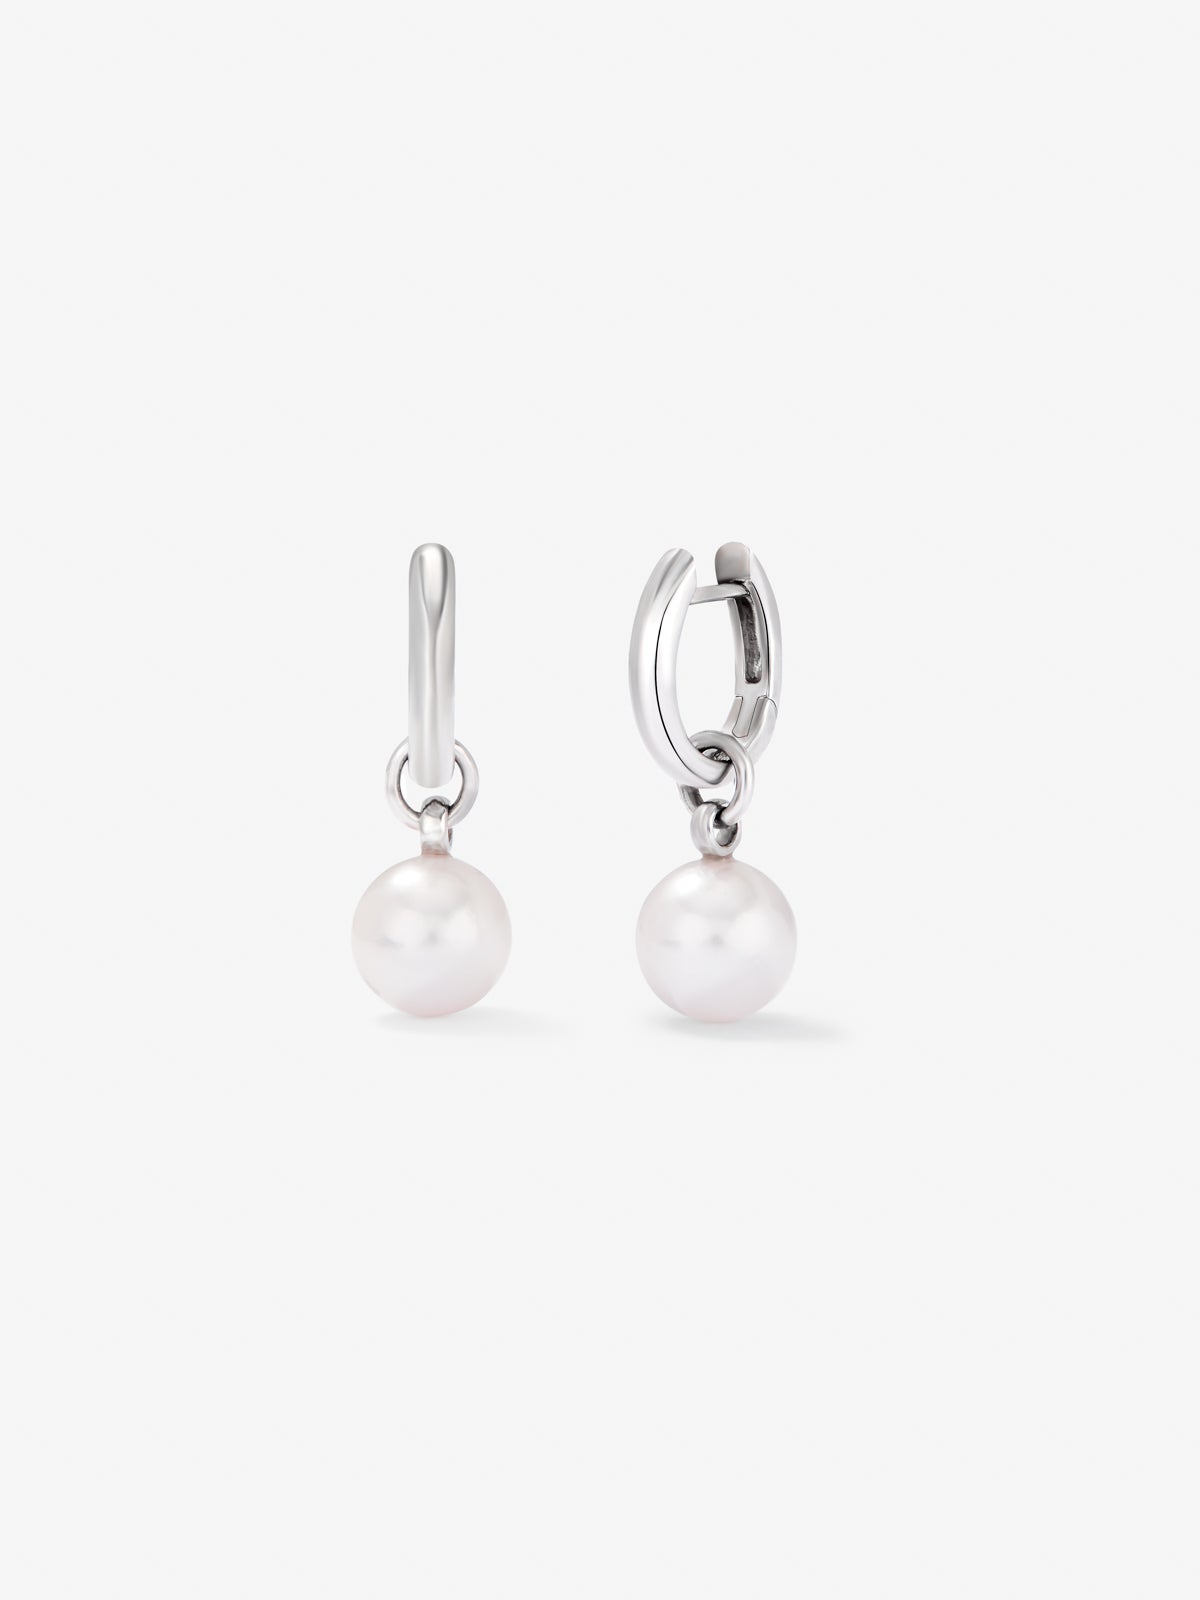 925 silver earrings with 8.5 mm Akoya pearls